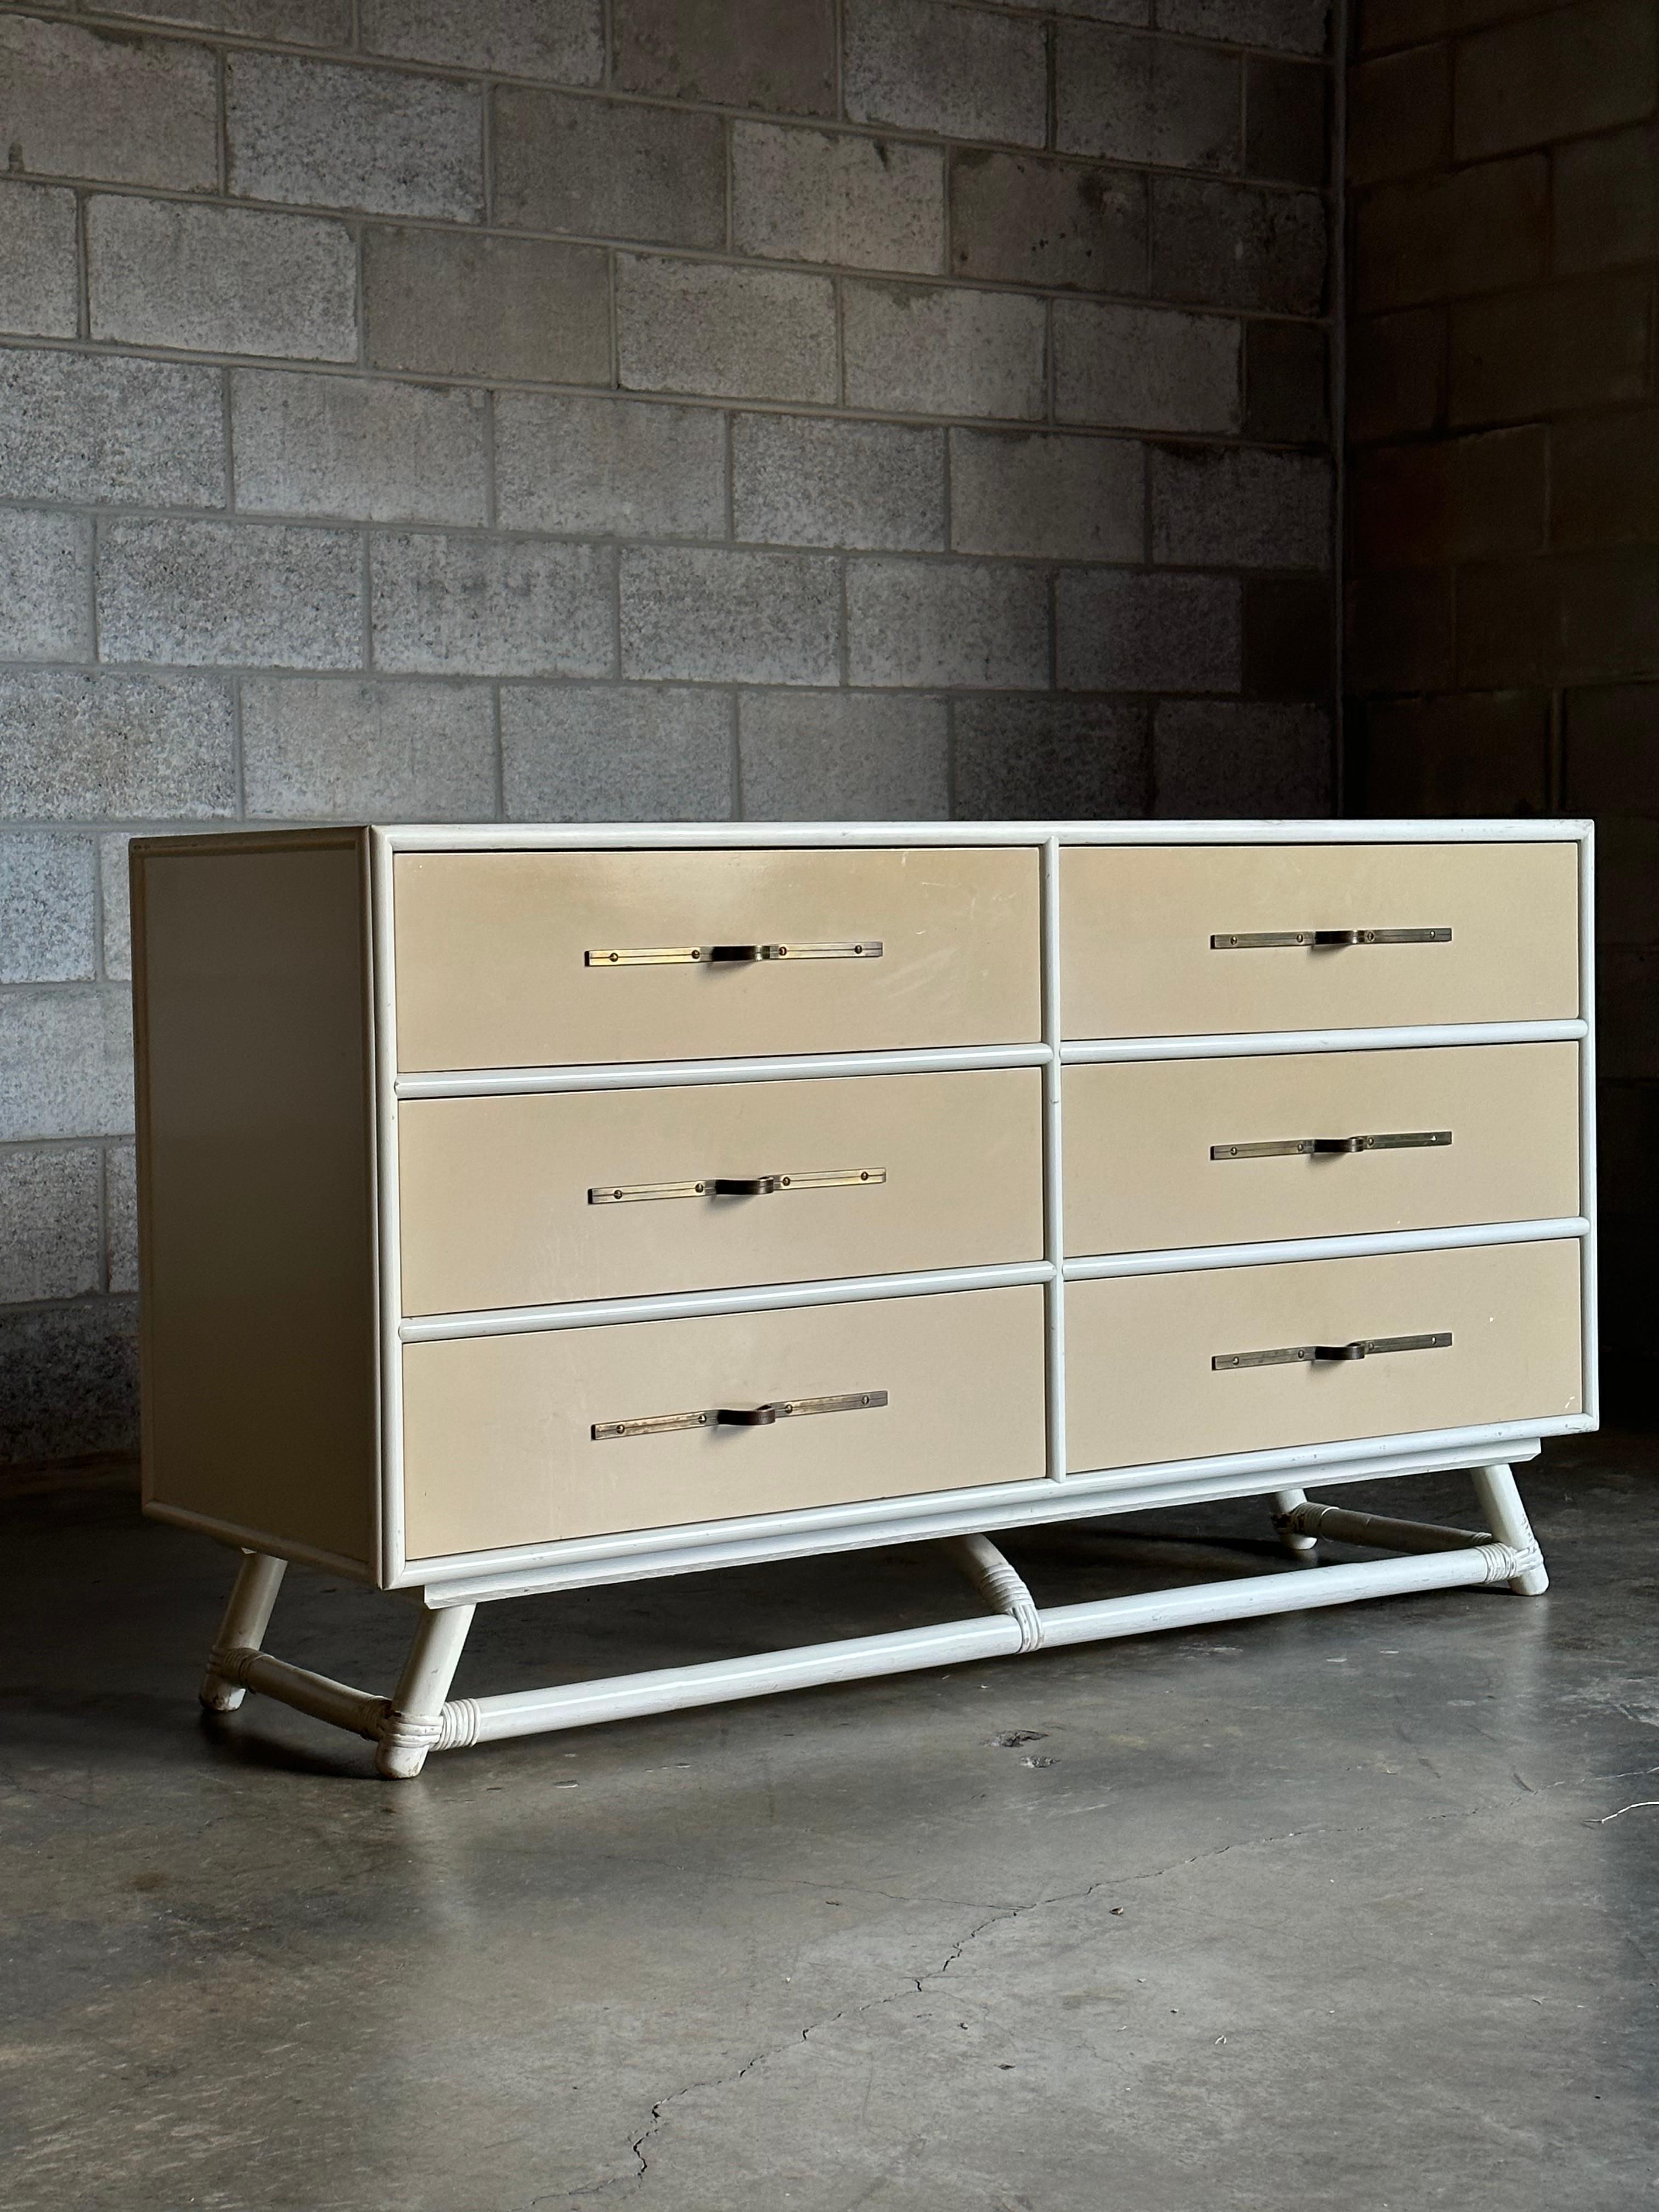 A rare dresser designed by Tommi Parzinger. This example appears to be in original condition with white exterior and tan drawer fronts, complete with fashionable drawer pulls so characteristic of Parzinger’s more common designs. There are 6 spacious